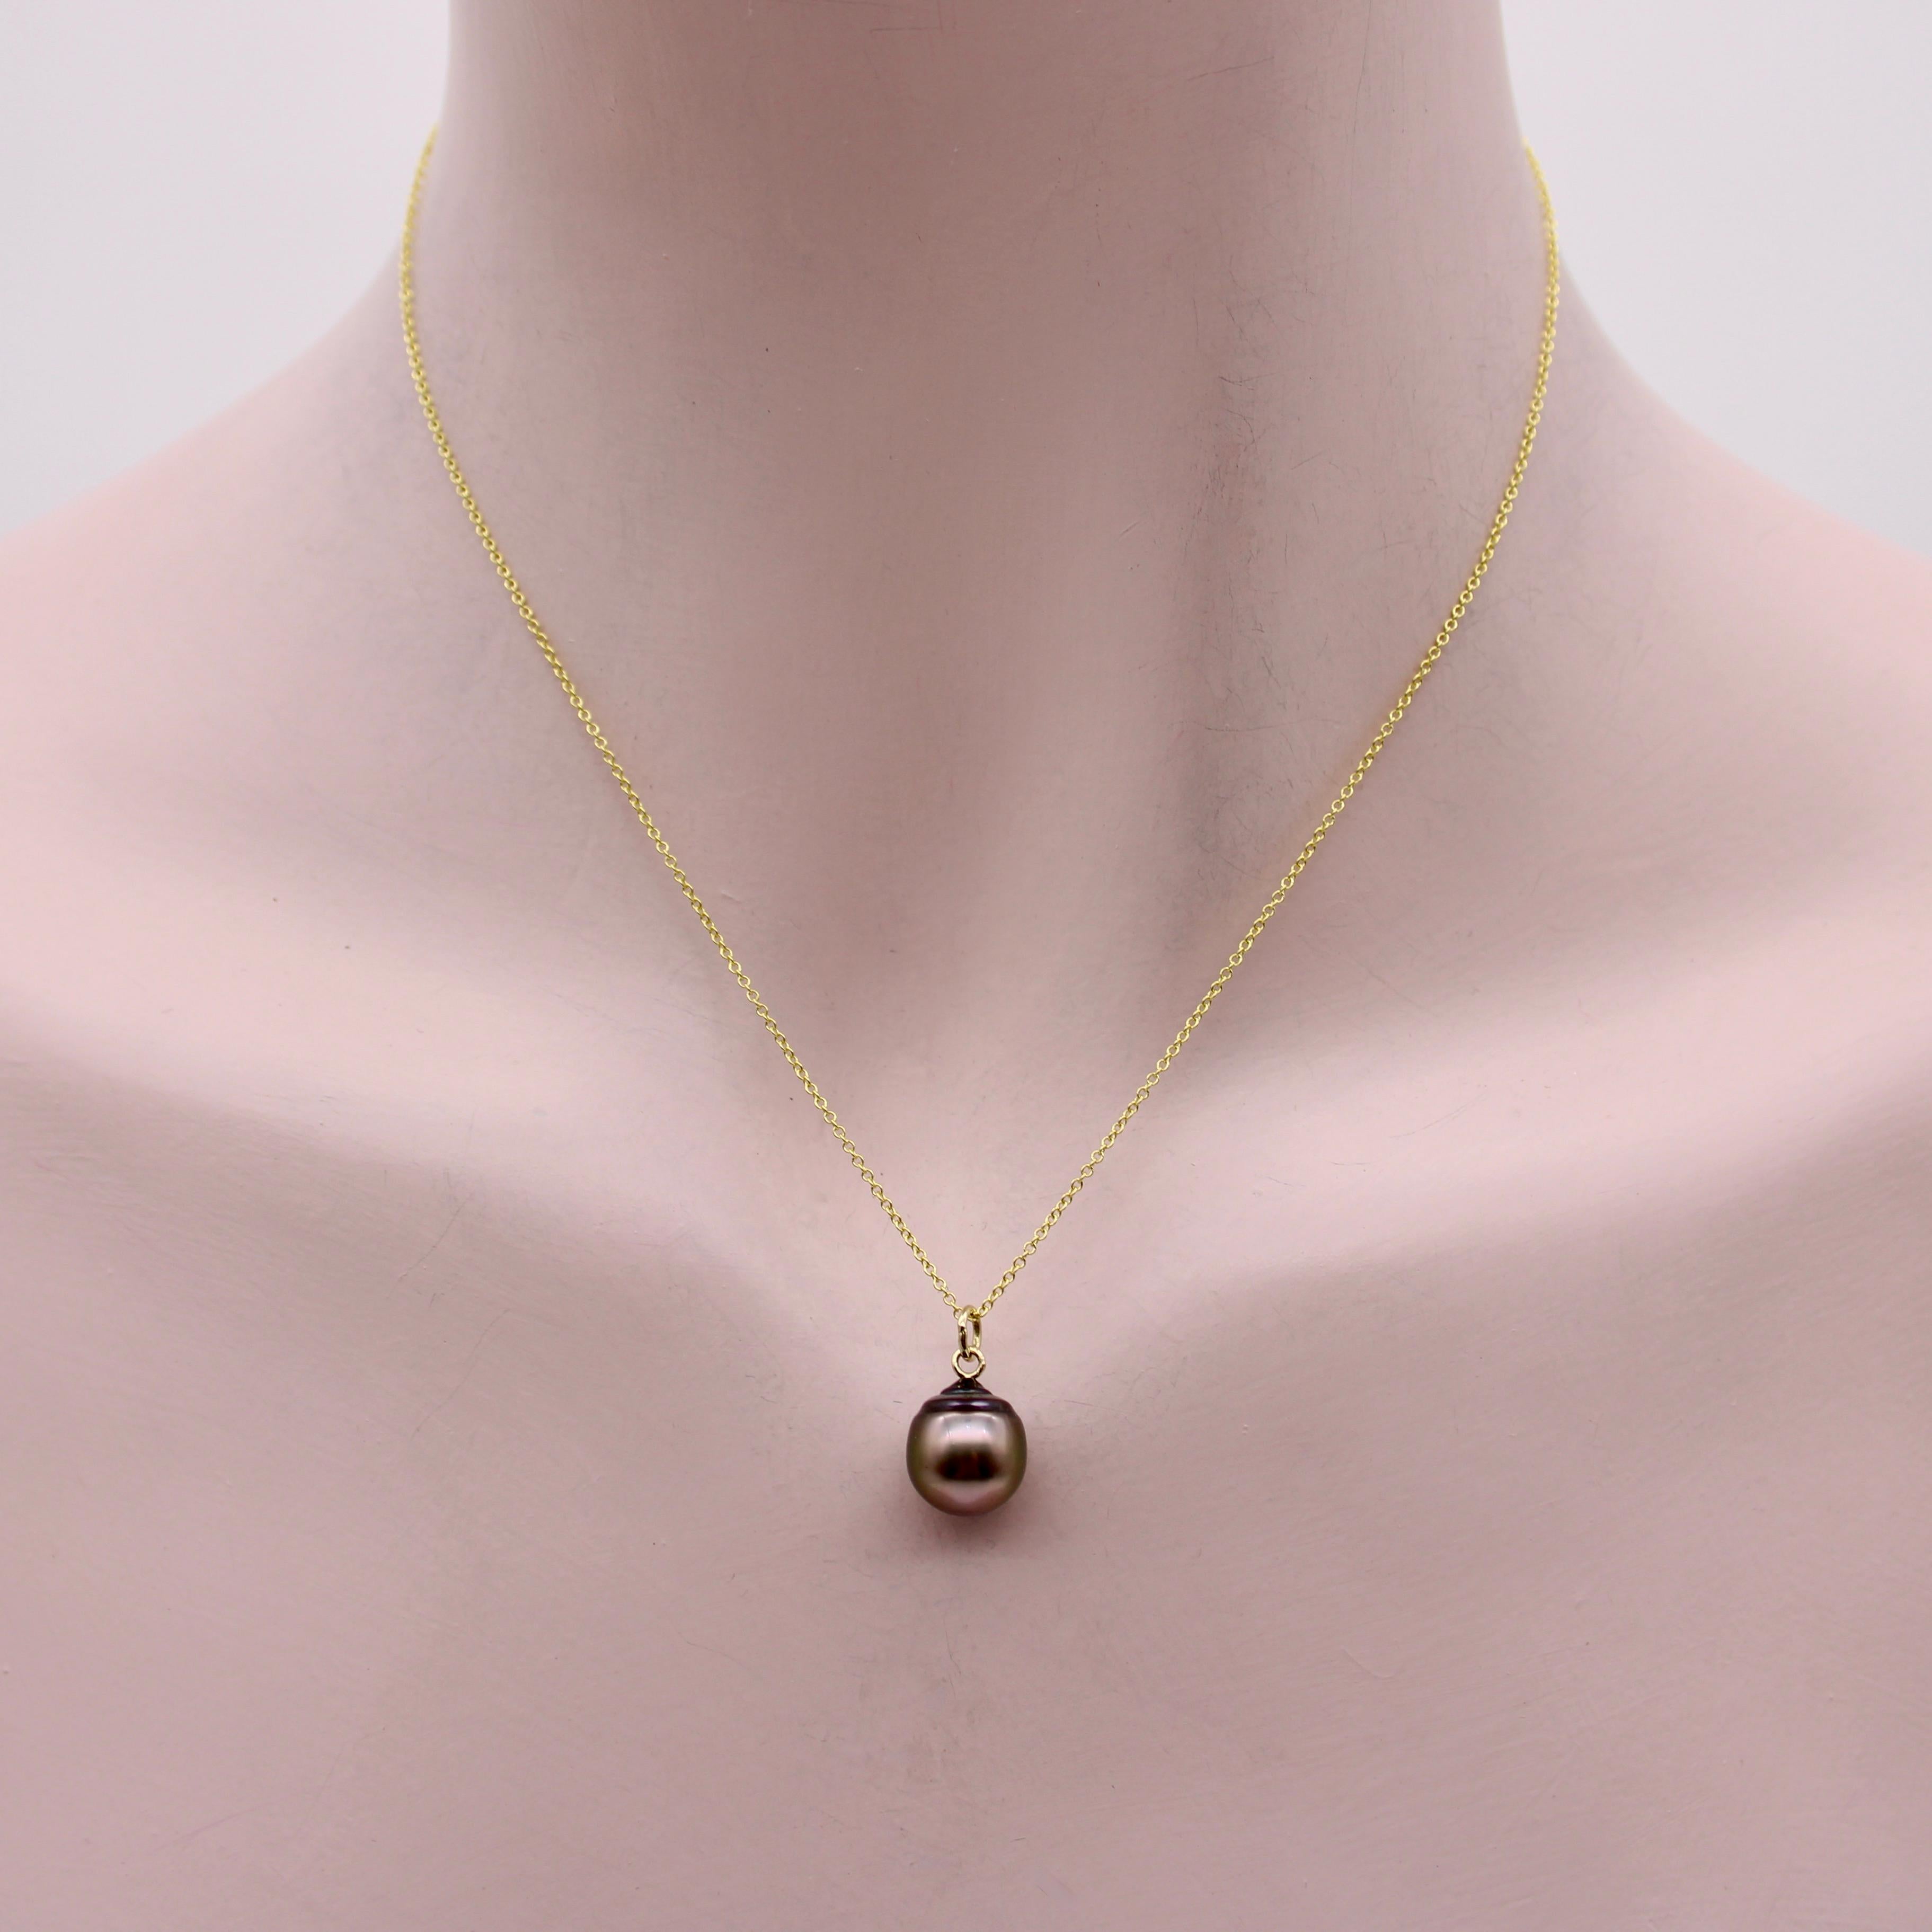 This Tahitian South Sea Black Pearl is beautifully round with a gorgeous, lustrous nacre. It connects at its drop point to a delicate 14k gold chain, making it a simple and stunning pendant necklace. The pearl is elongated at the top and makes for